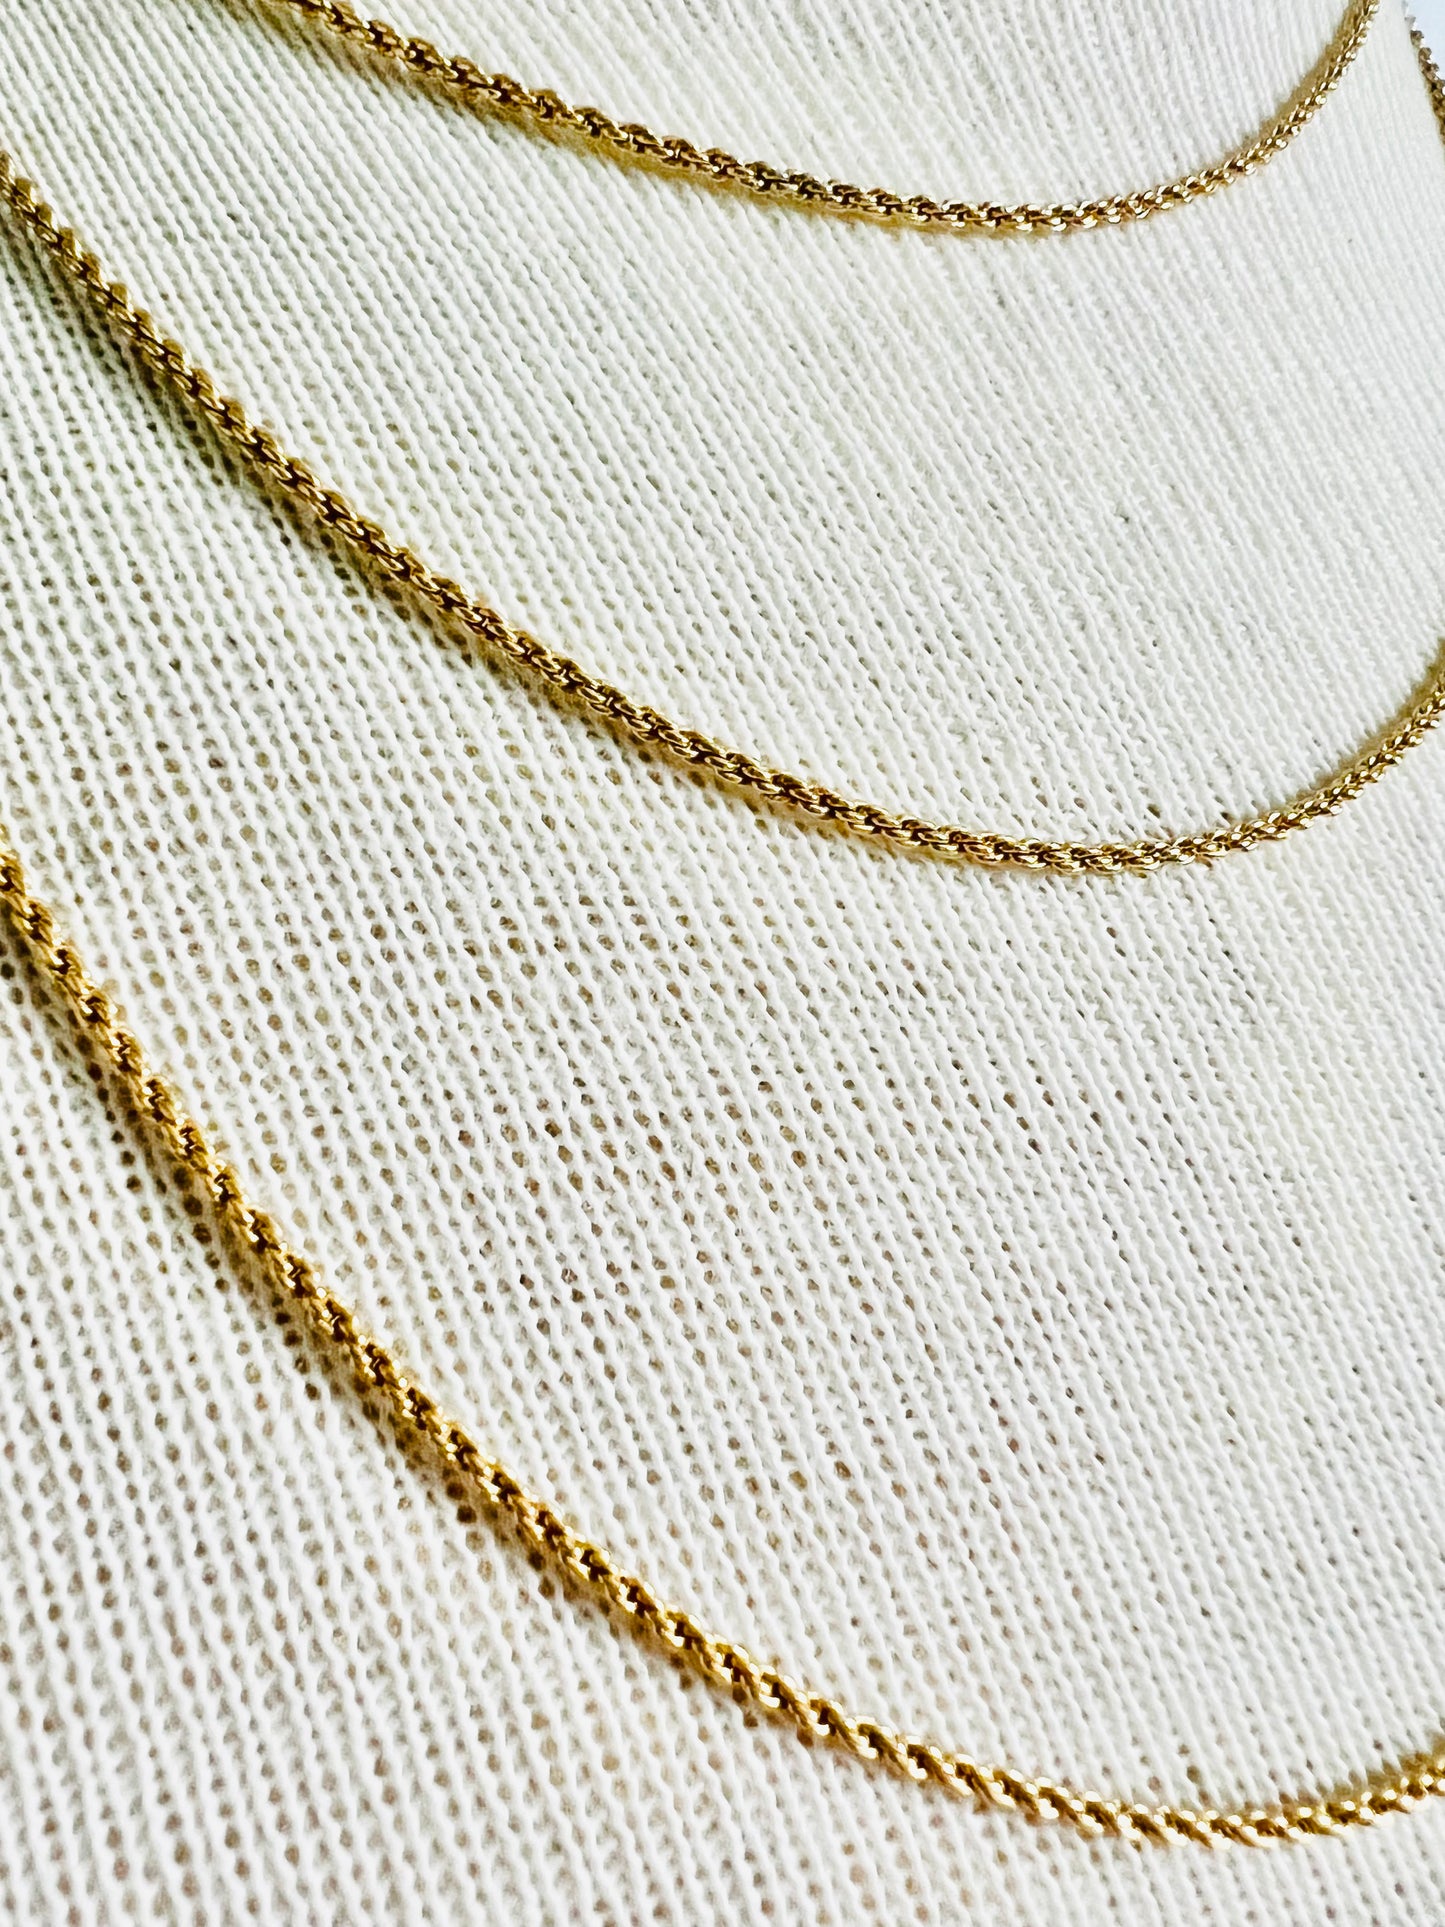 Vintage Very Long 14k Gold Filled Dainty Chain